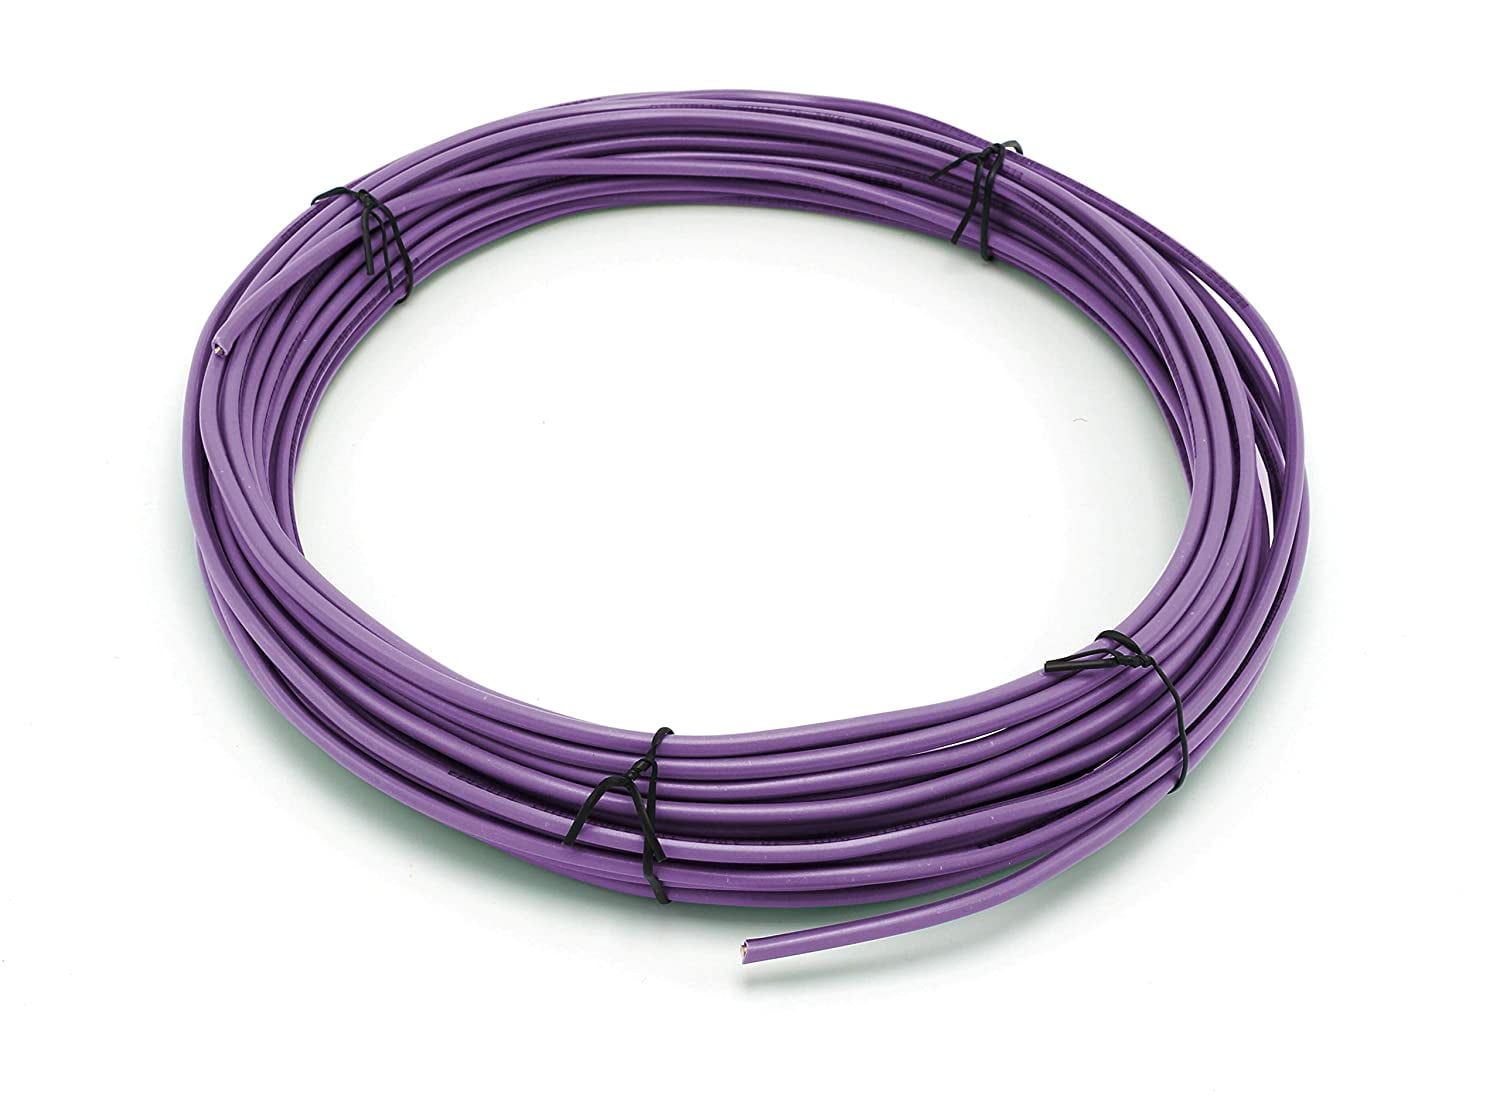 12 GAUGE WIRE ENNIS ELECTRONICS 25 FT PURPLE PRIMARY STRANDED AWG COPPER CLAD 